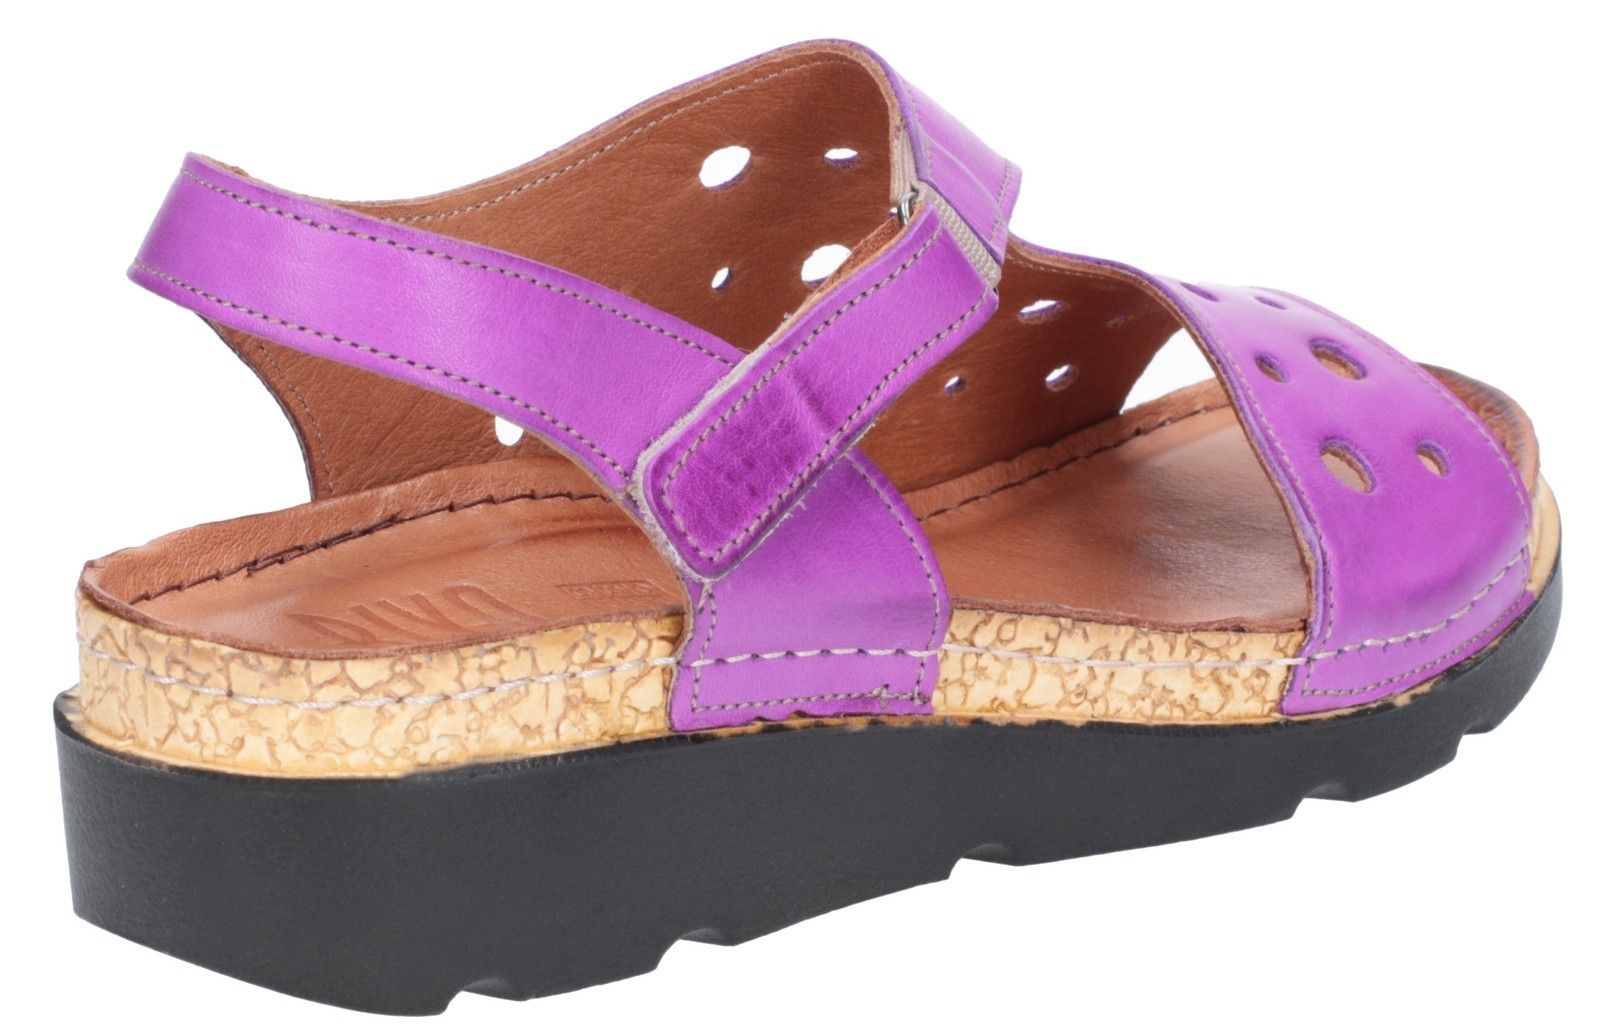 Off-duty sandal with asymmetric punched detail upper, comfortable open toe and sling back strap. A cork effect mid layer on the wedge platform rests a comfortable cushioned foot bed. Soft and supple leather uppers. 
Punched detailing. 
Open toe asymmetric design. 
Sling back strap with subtle elasticated panel. 
Adjustable touch fastening strap.